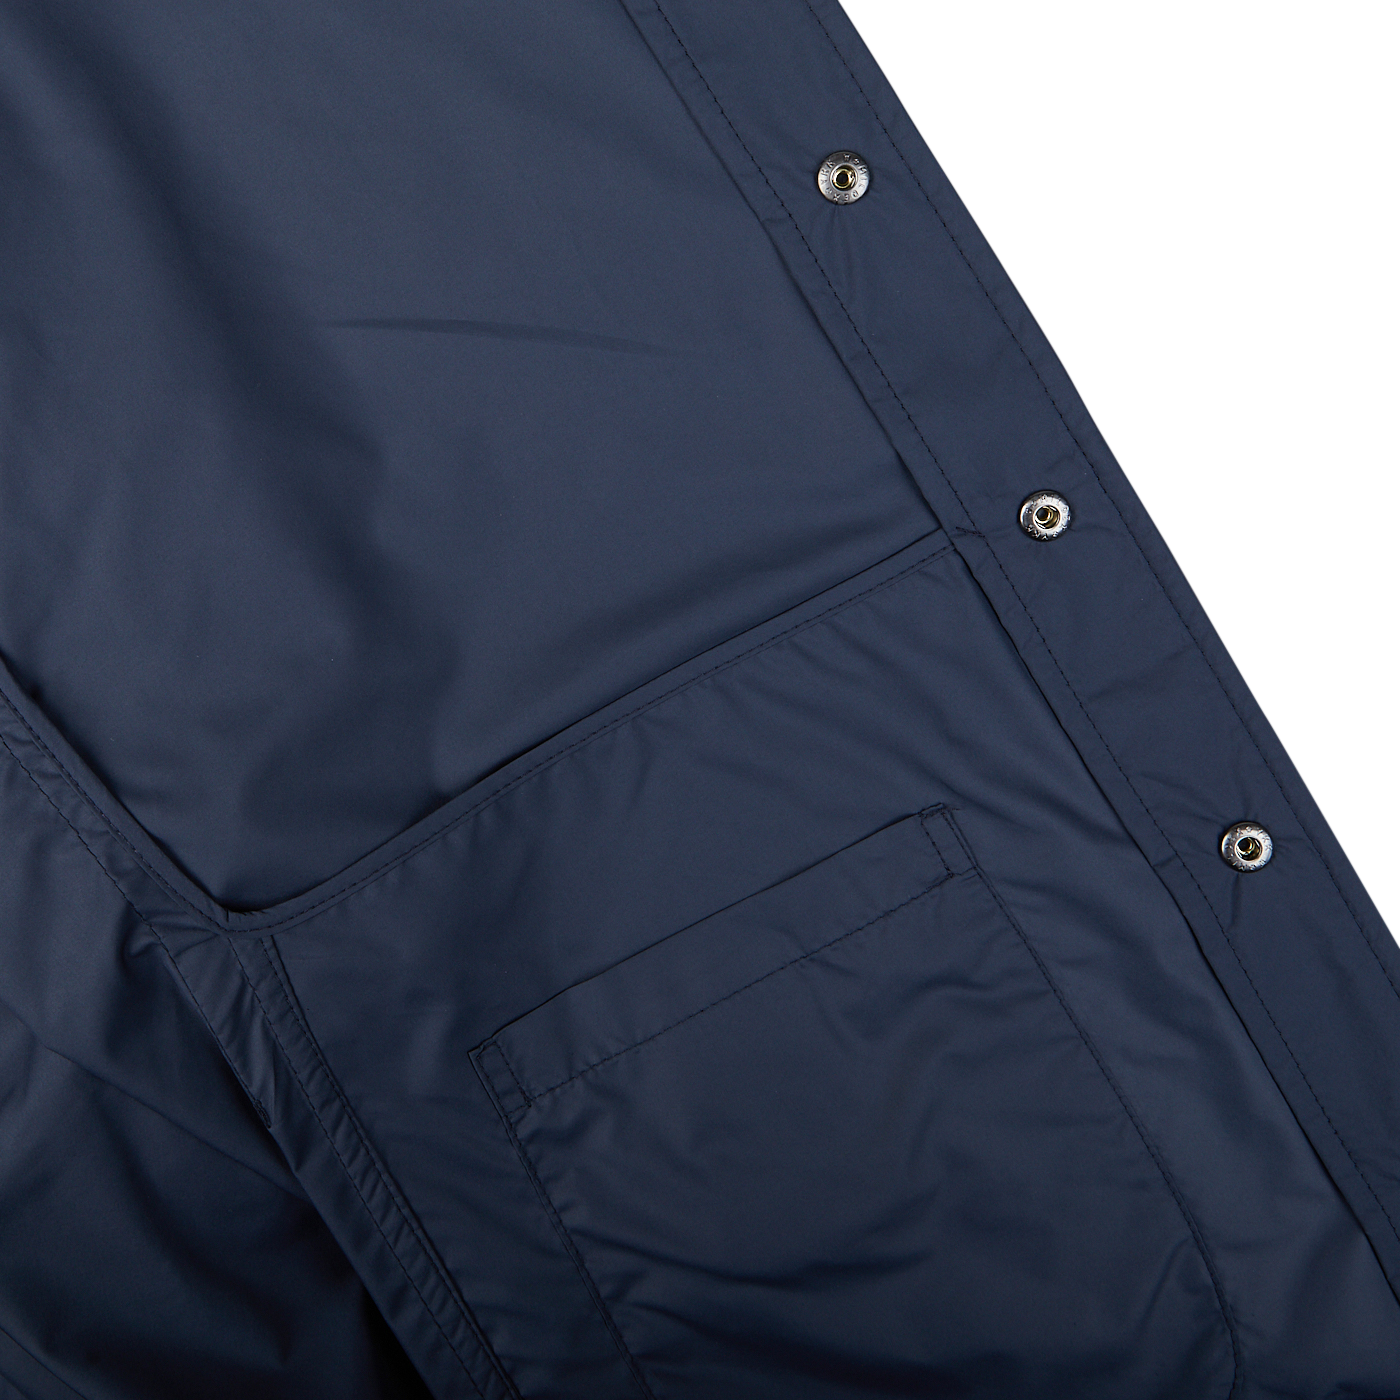 Close-up of a Mazzarelli navy blue nylon water resistant overshirt with pockets and snap buttons.